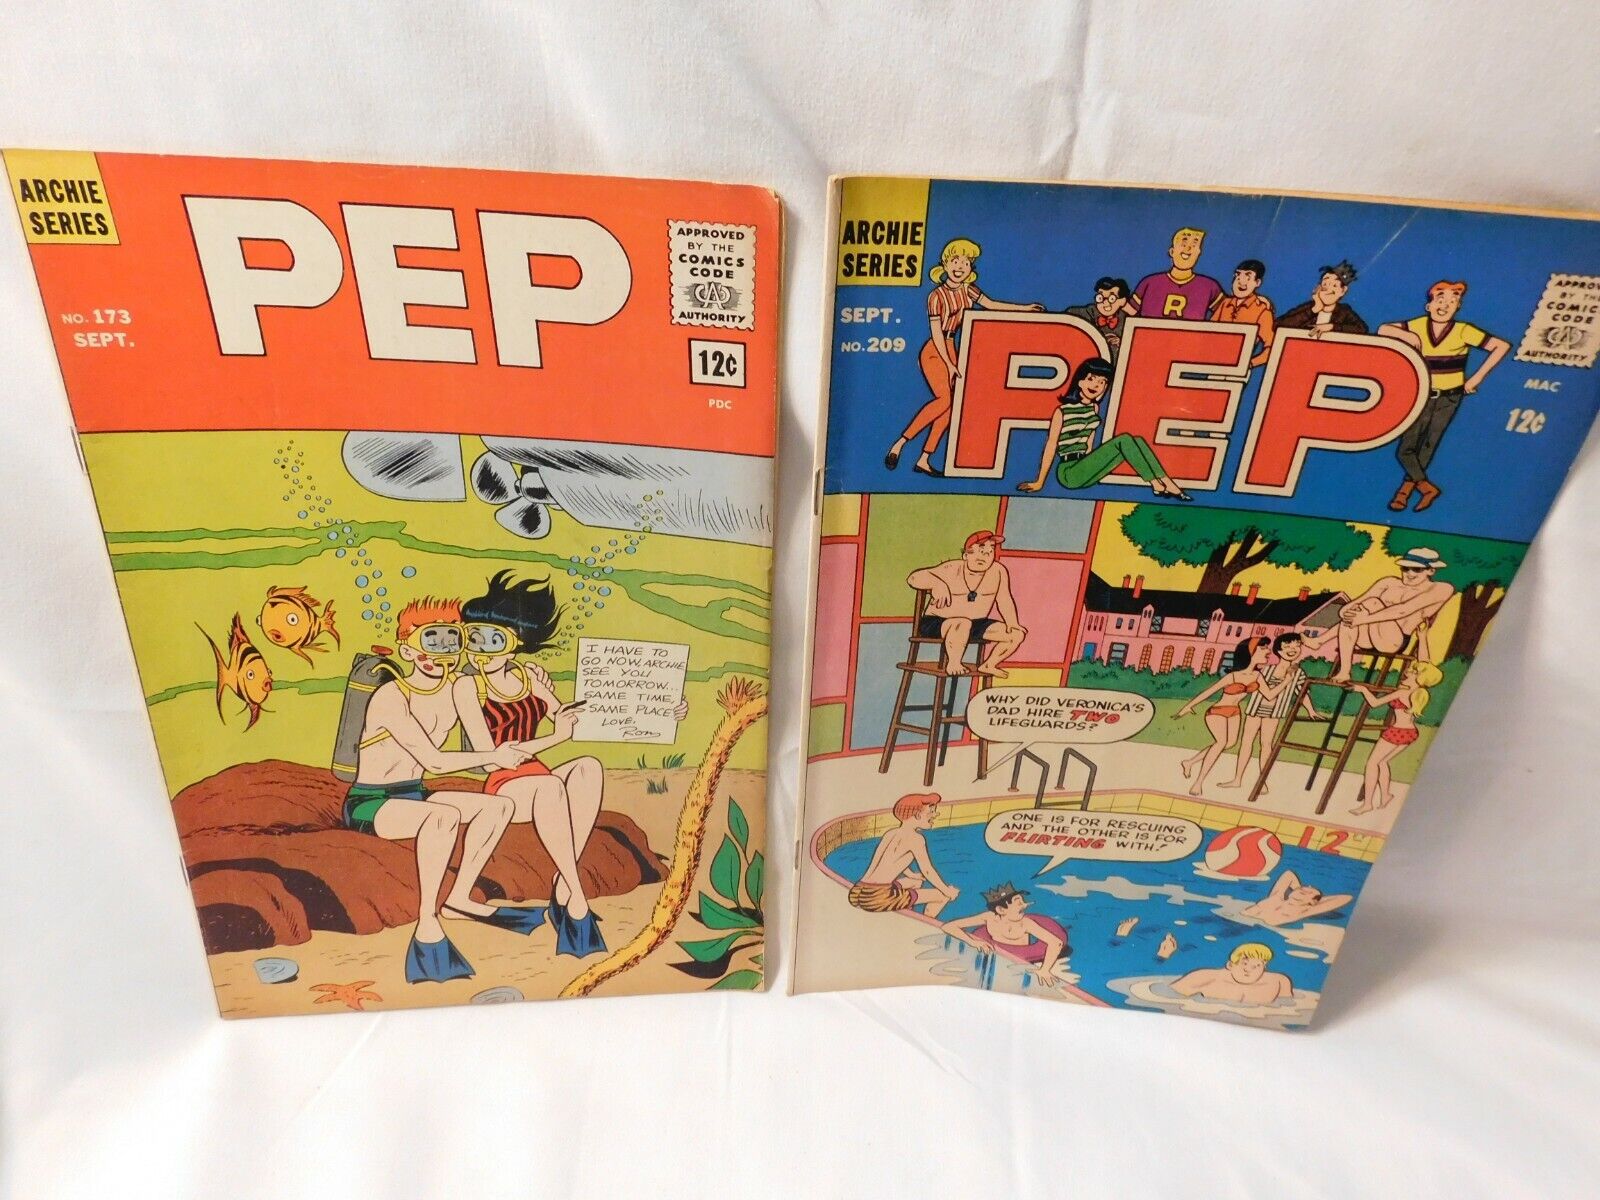 ARCHIE SERIES PEP Comic Books Issue 173 and 209 Silver Age